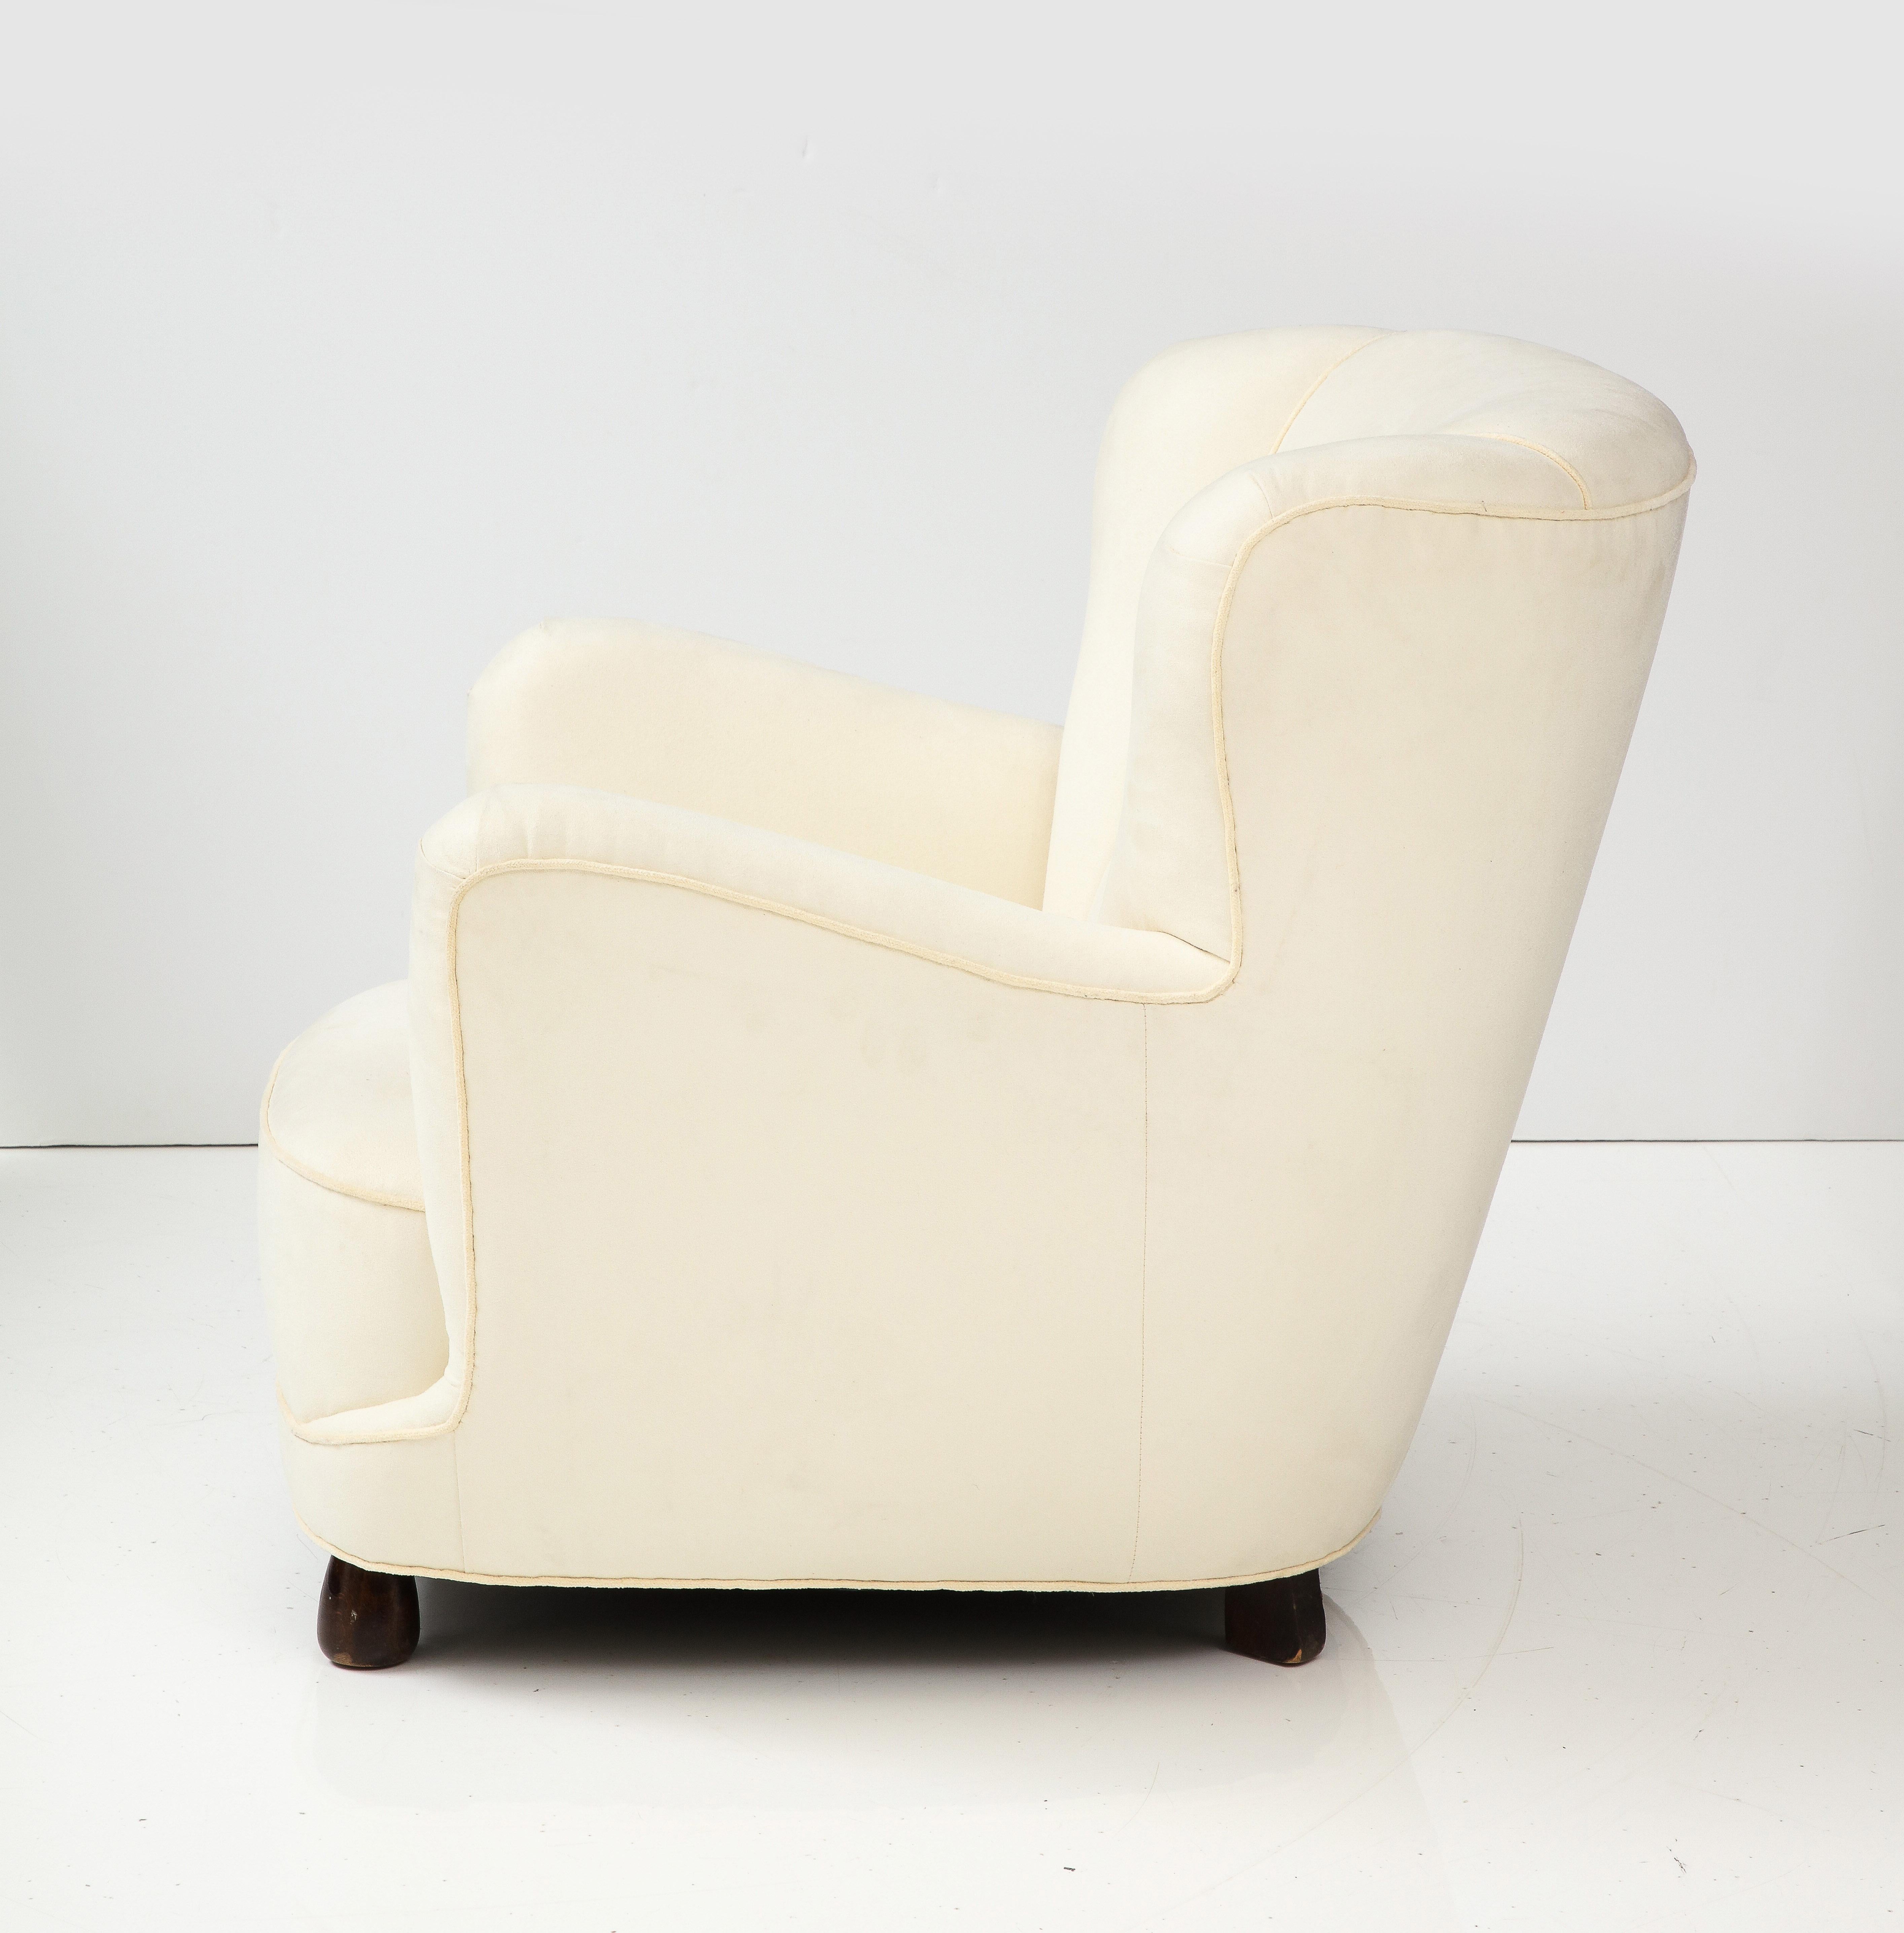 Danish Upholstered Club Chair in Muslin, 1940's For Sale 3